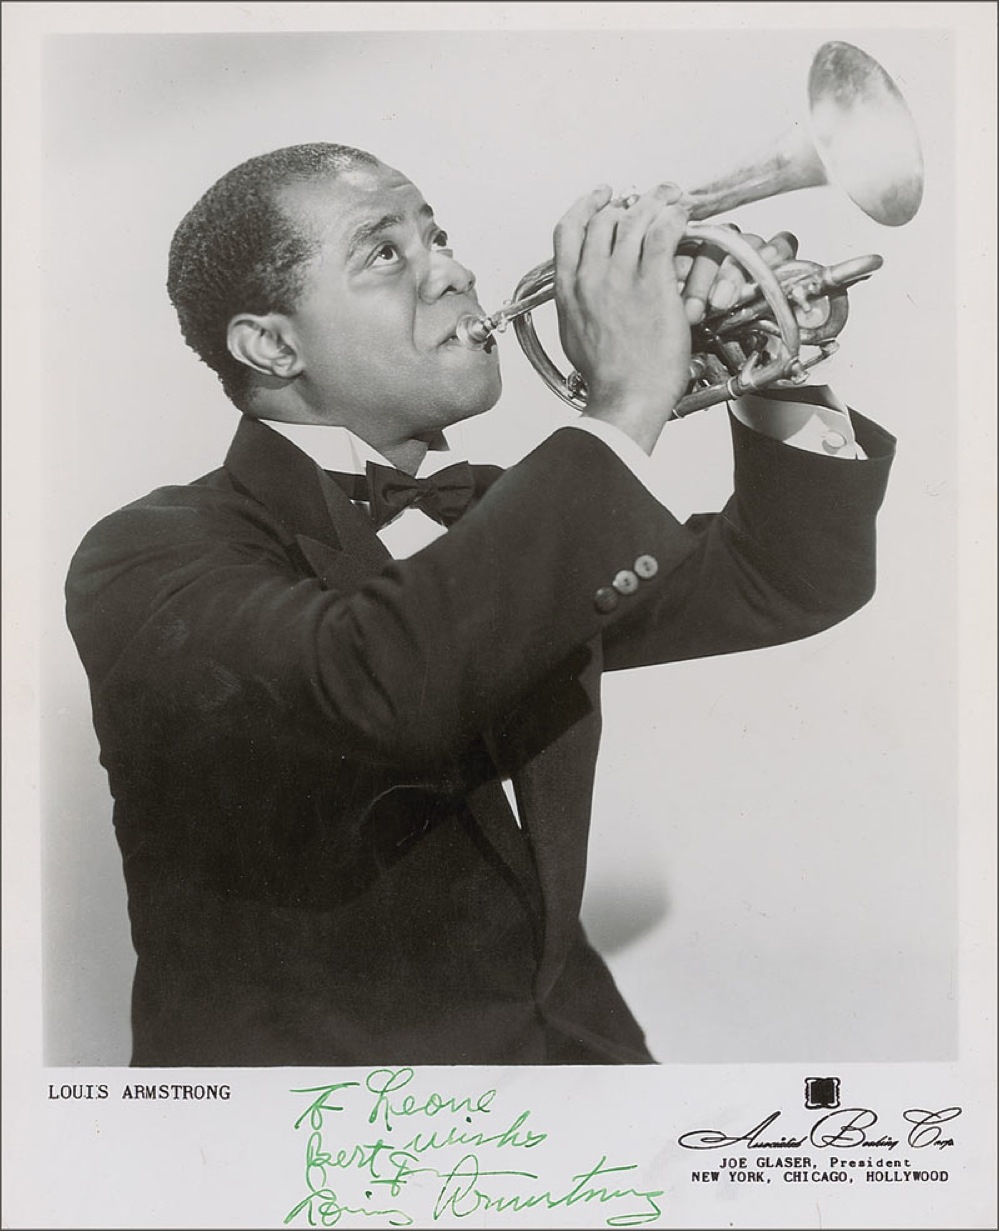 Lot #726 Louis Armstrong